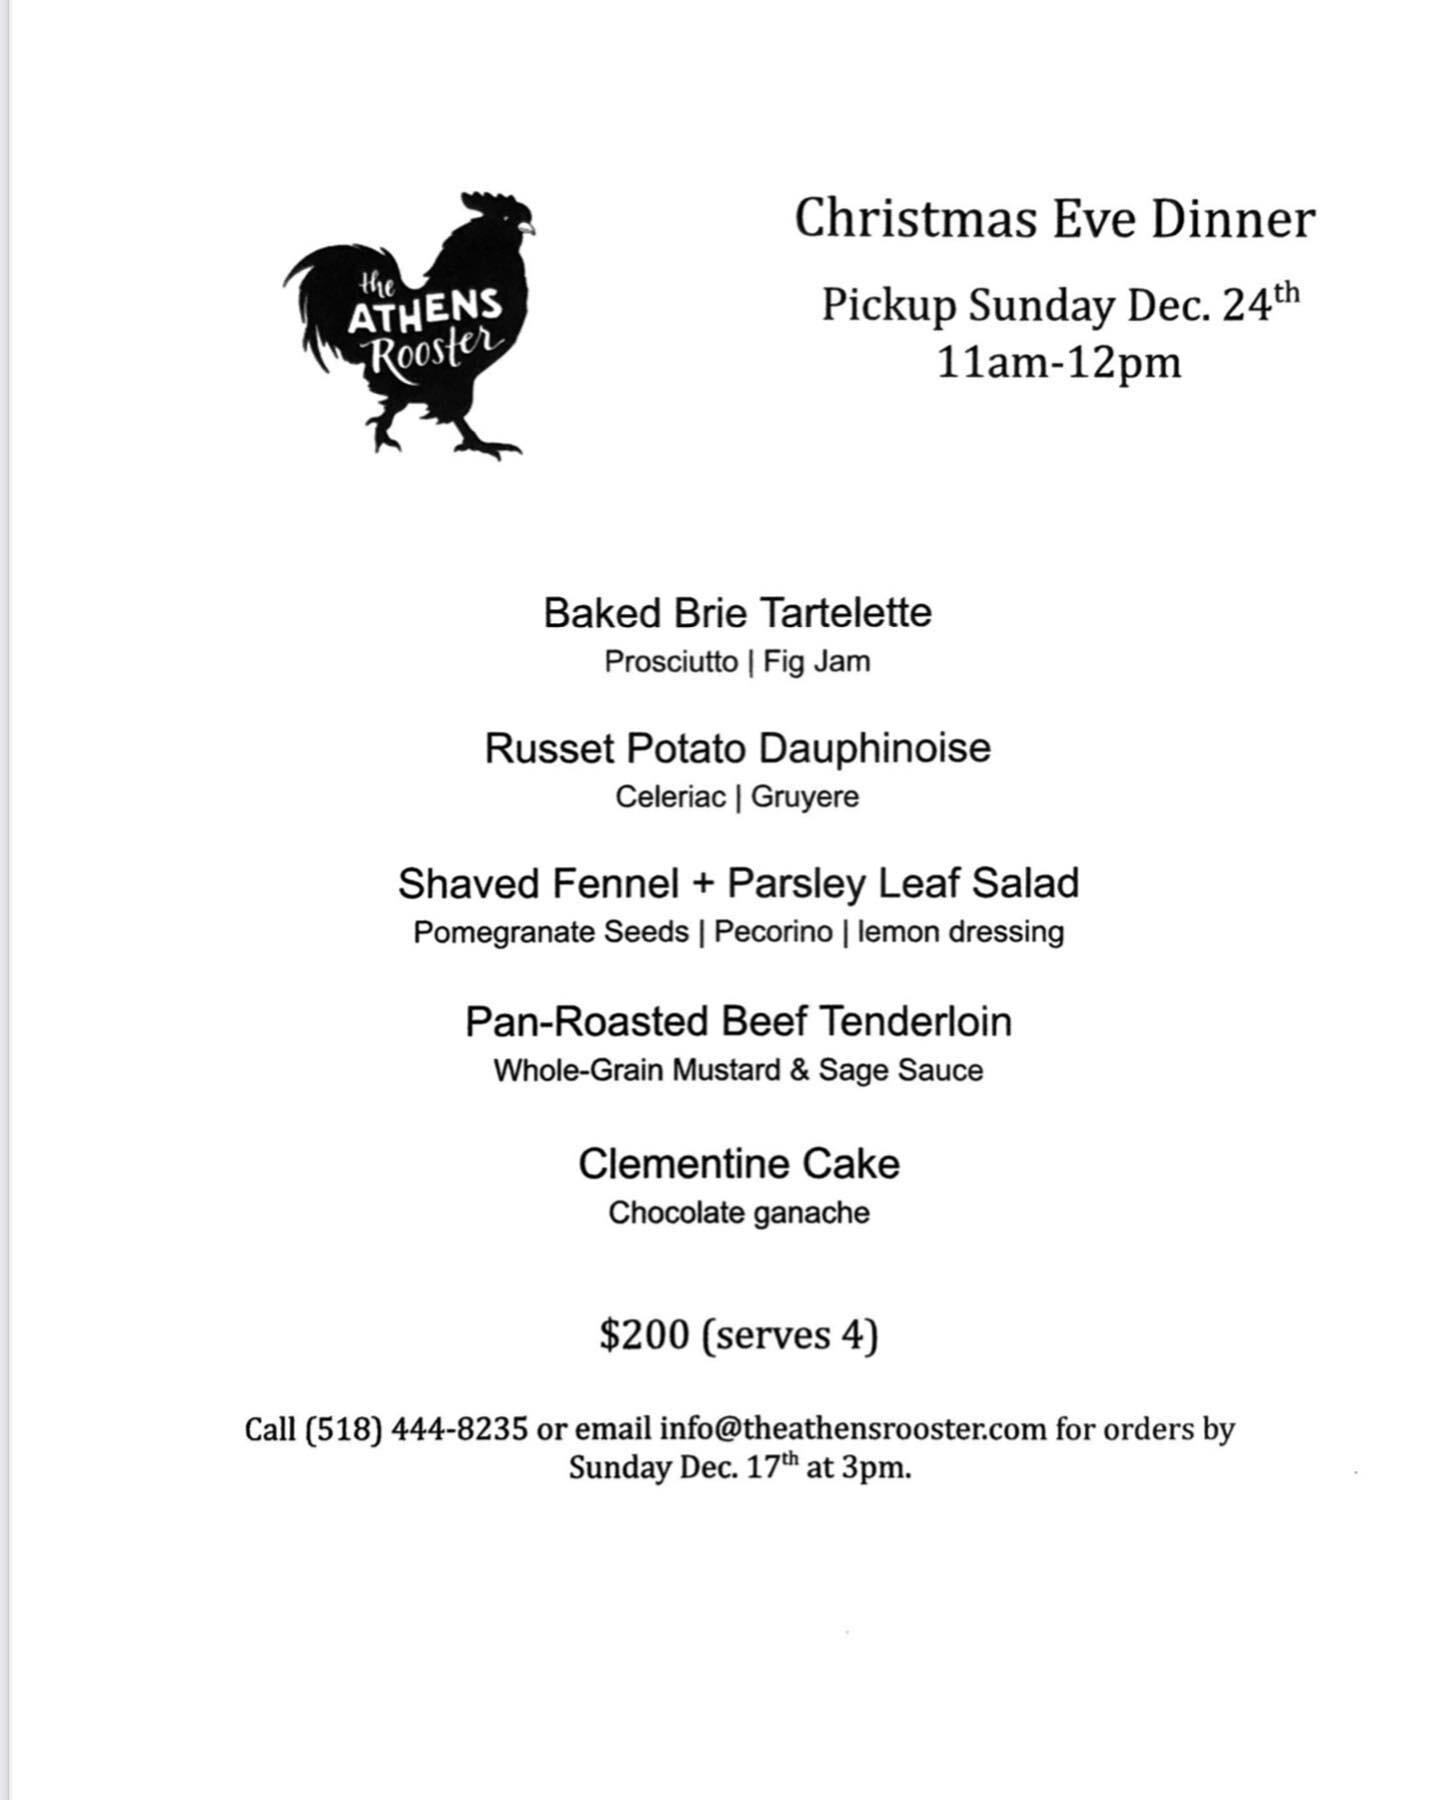 Christmas Eve dinner menu is live, treat yourself to time with your nearest and dearest instead of the time in the kitchen!  Limited quantities so get your order in early 🎄